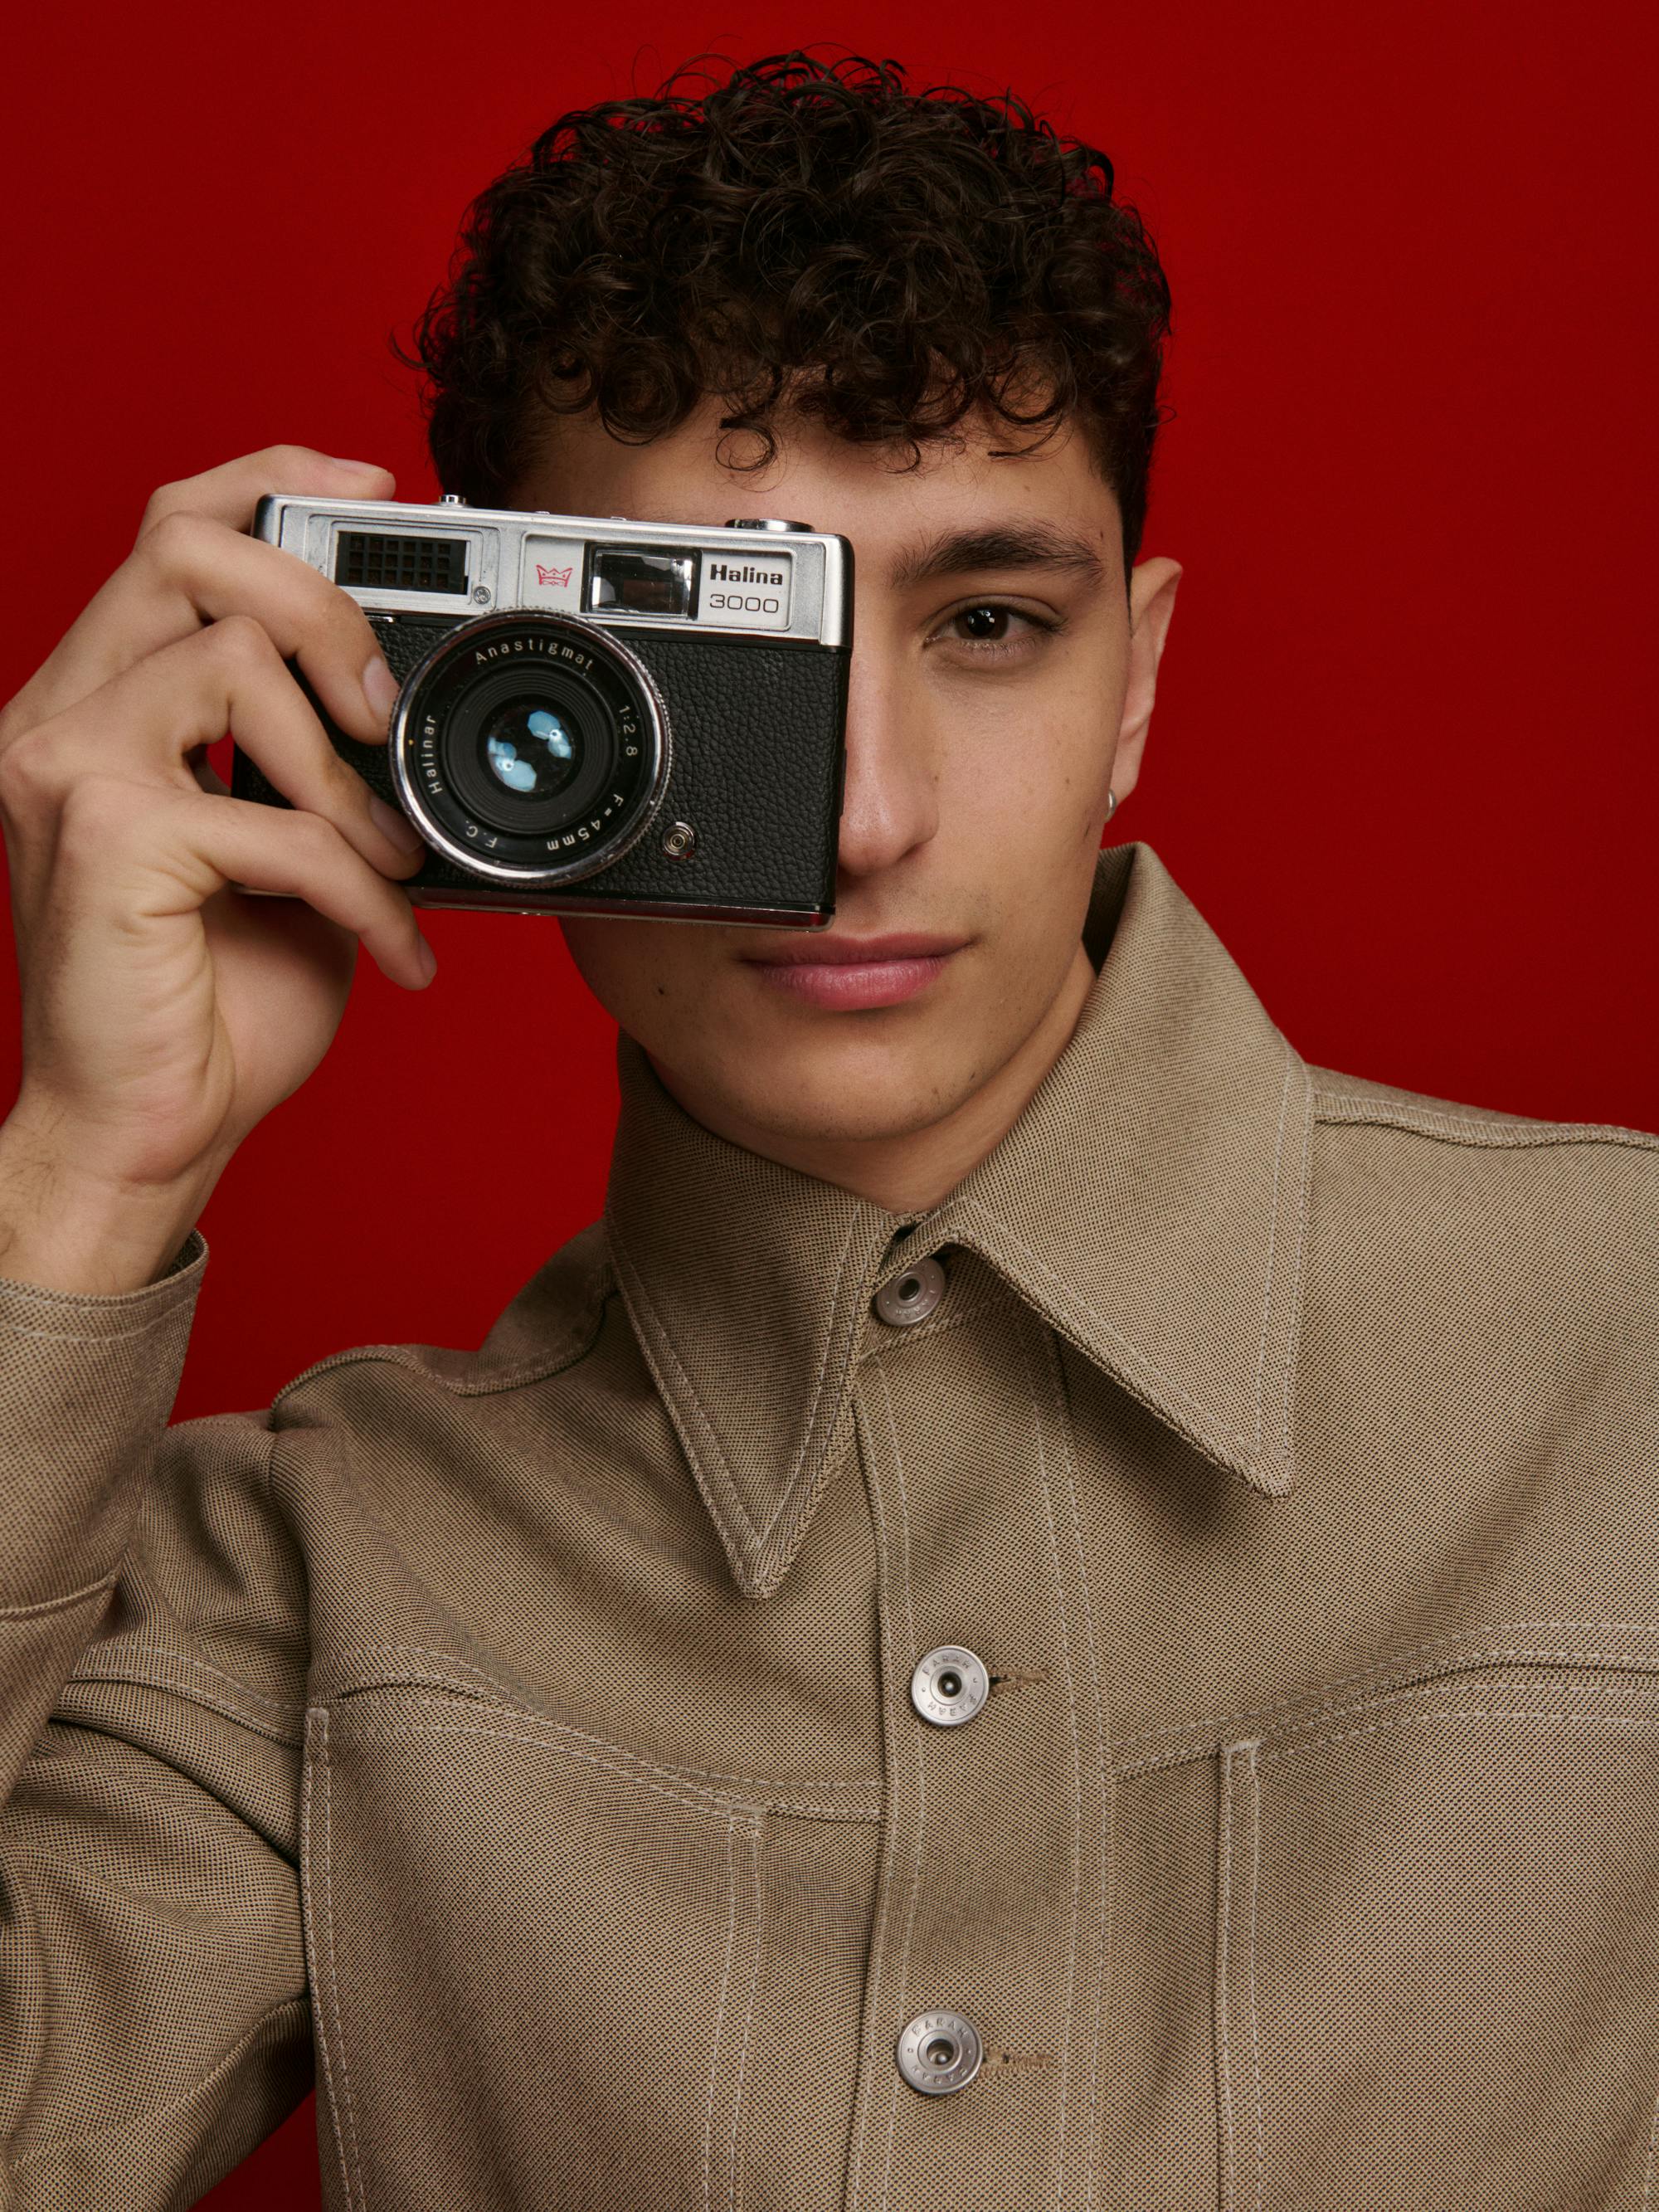 Jayden Revri wears a khaki shirt and takes a picture with an old camera.